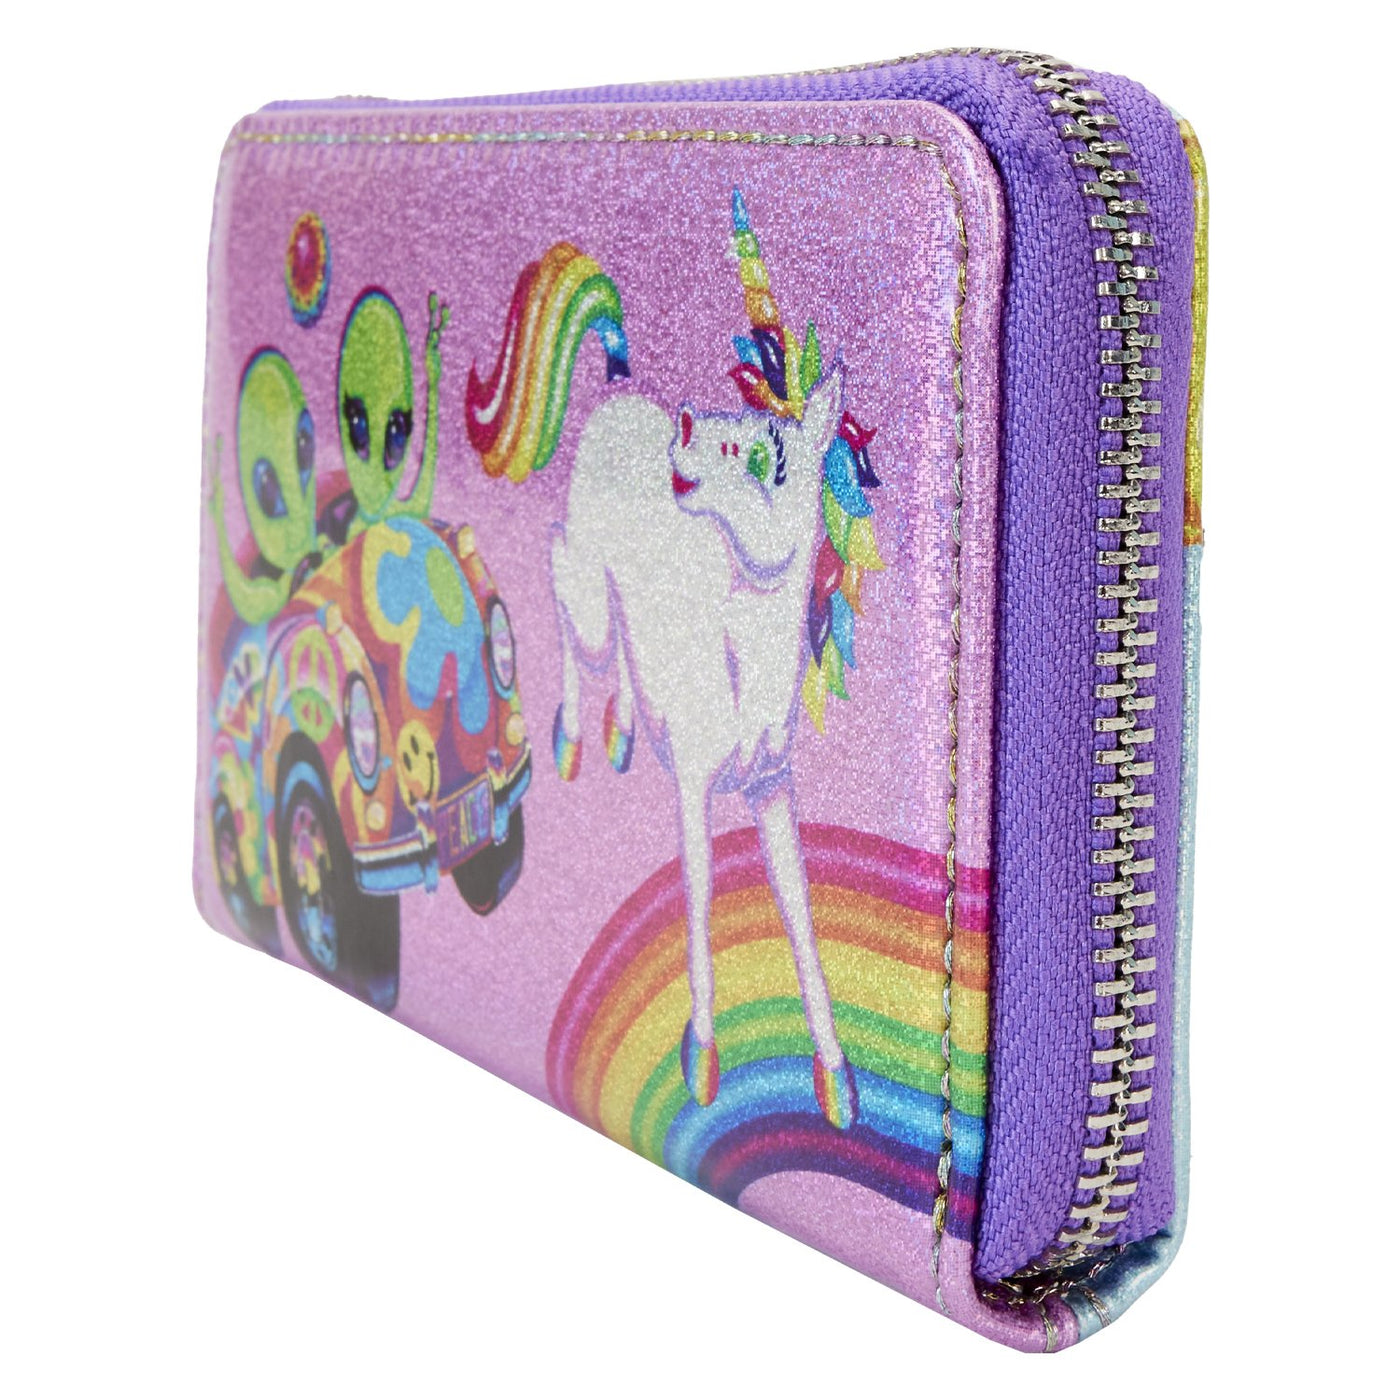 Loungefly Lisa Frank Color Block Wallet - Side View